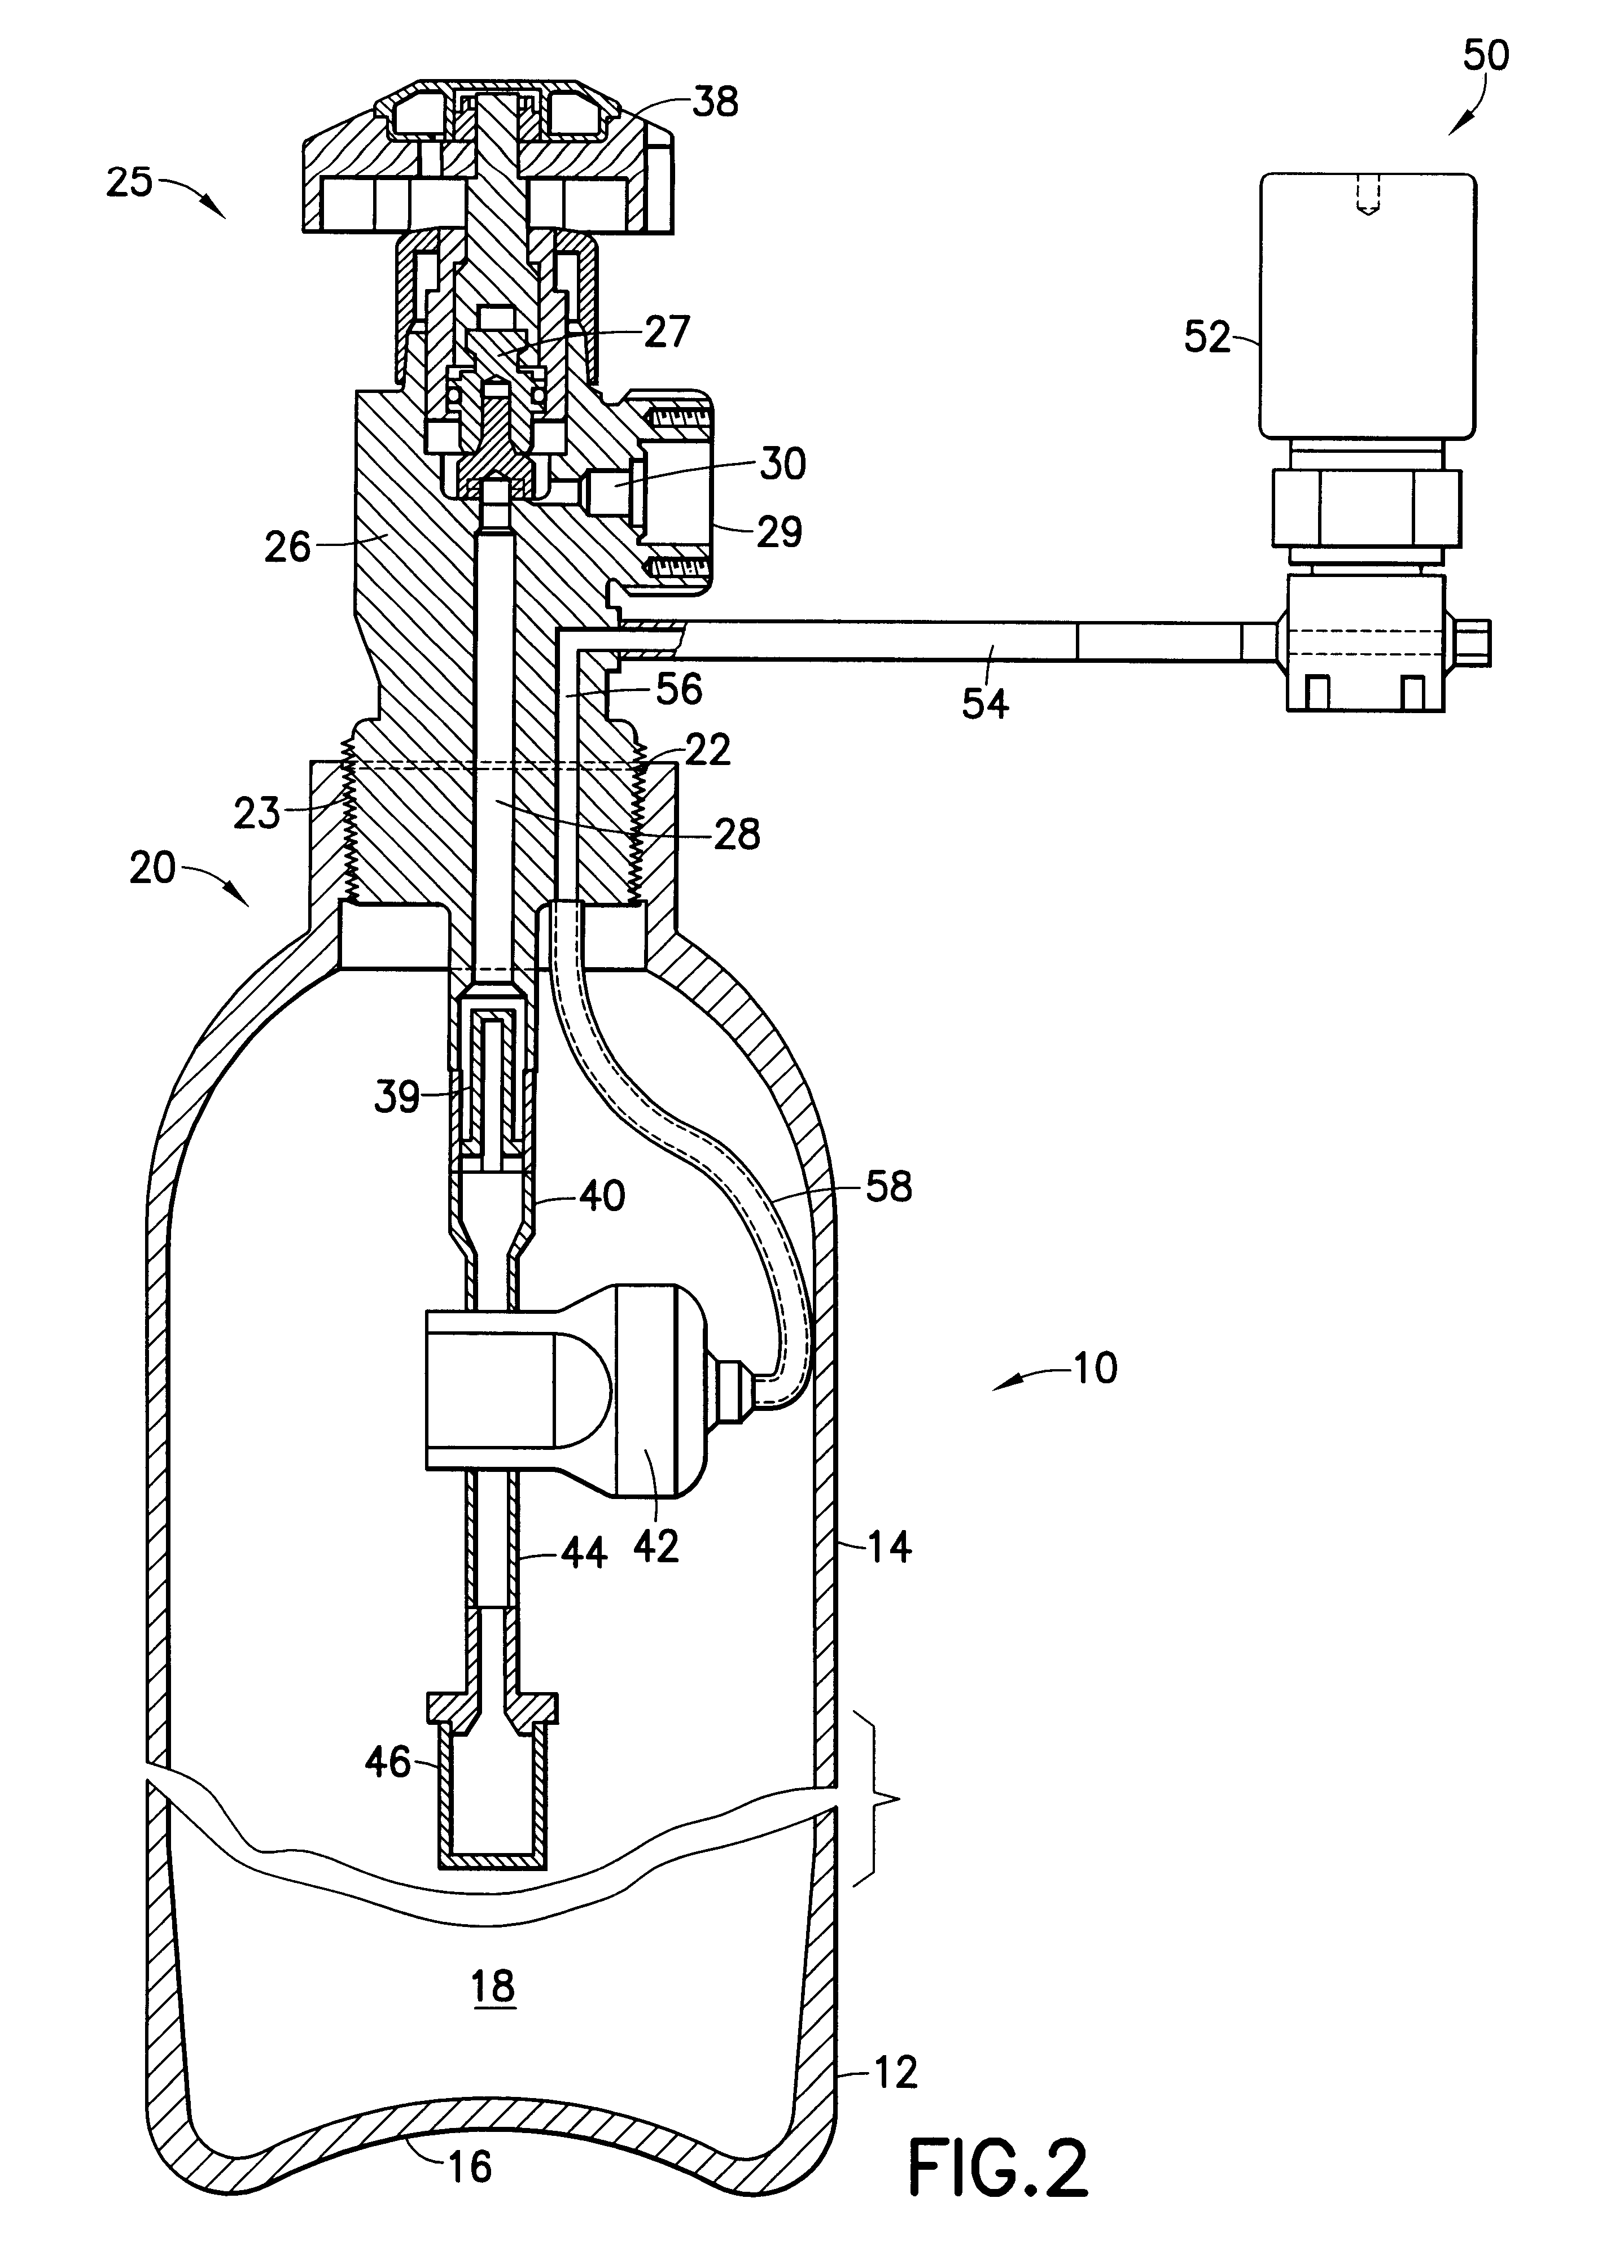 Fluid storage and dispensing system featuring interiorly disposed and exteriorly adjustable regulator for high flow dispensing of gas